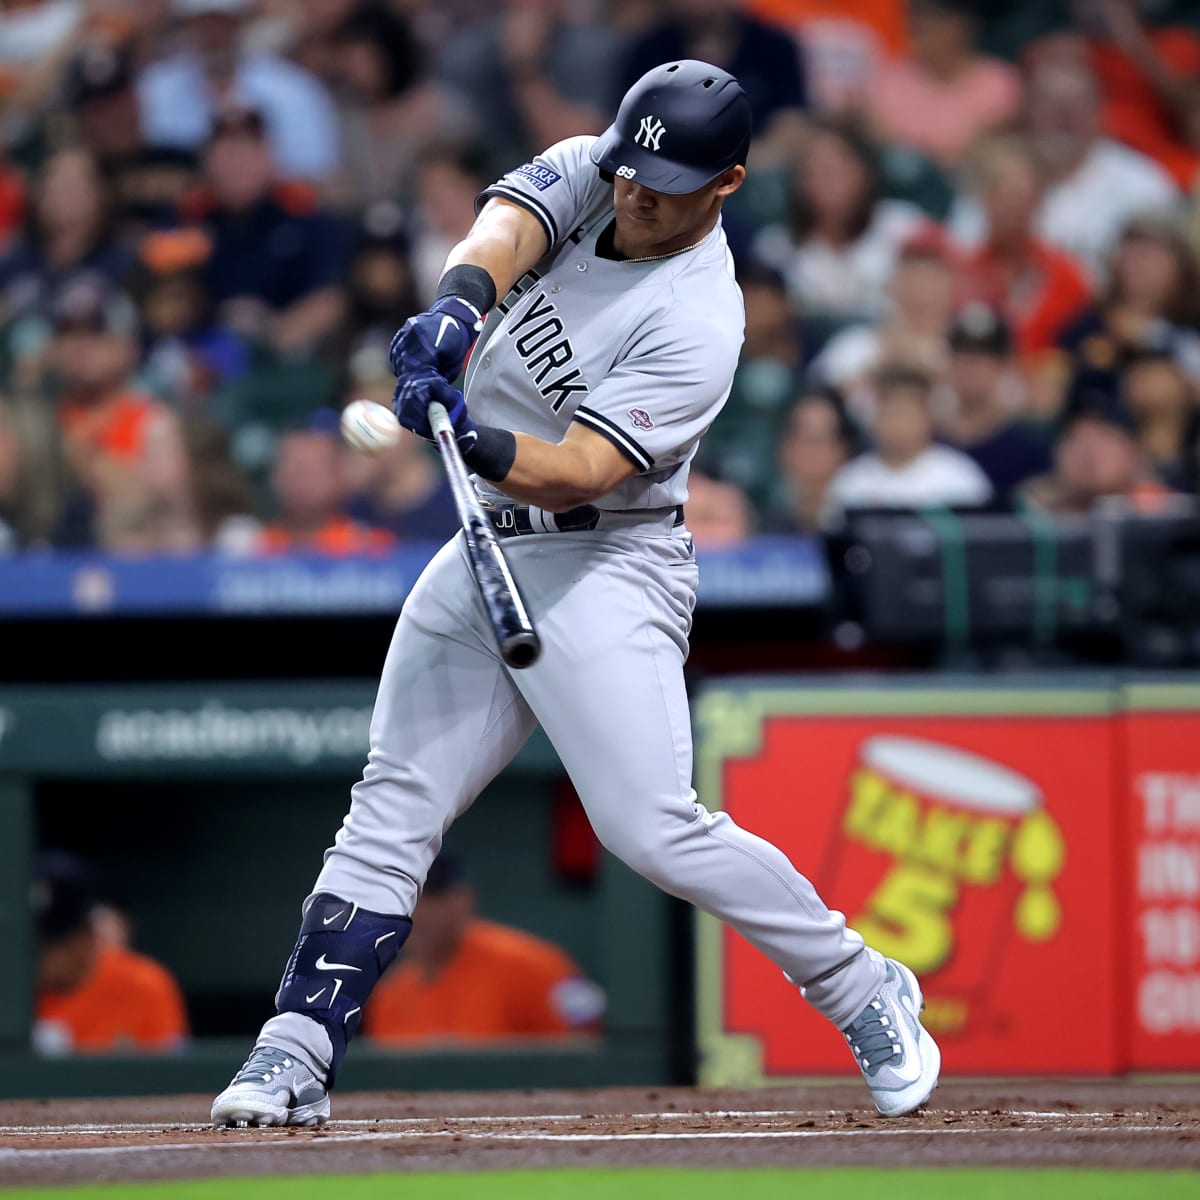 New York Yankees Prospect Jasson Dominguez Makes History in First MLB At-Bat  - Sports Illustrated NY Yankees News, Analysis and More